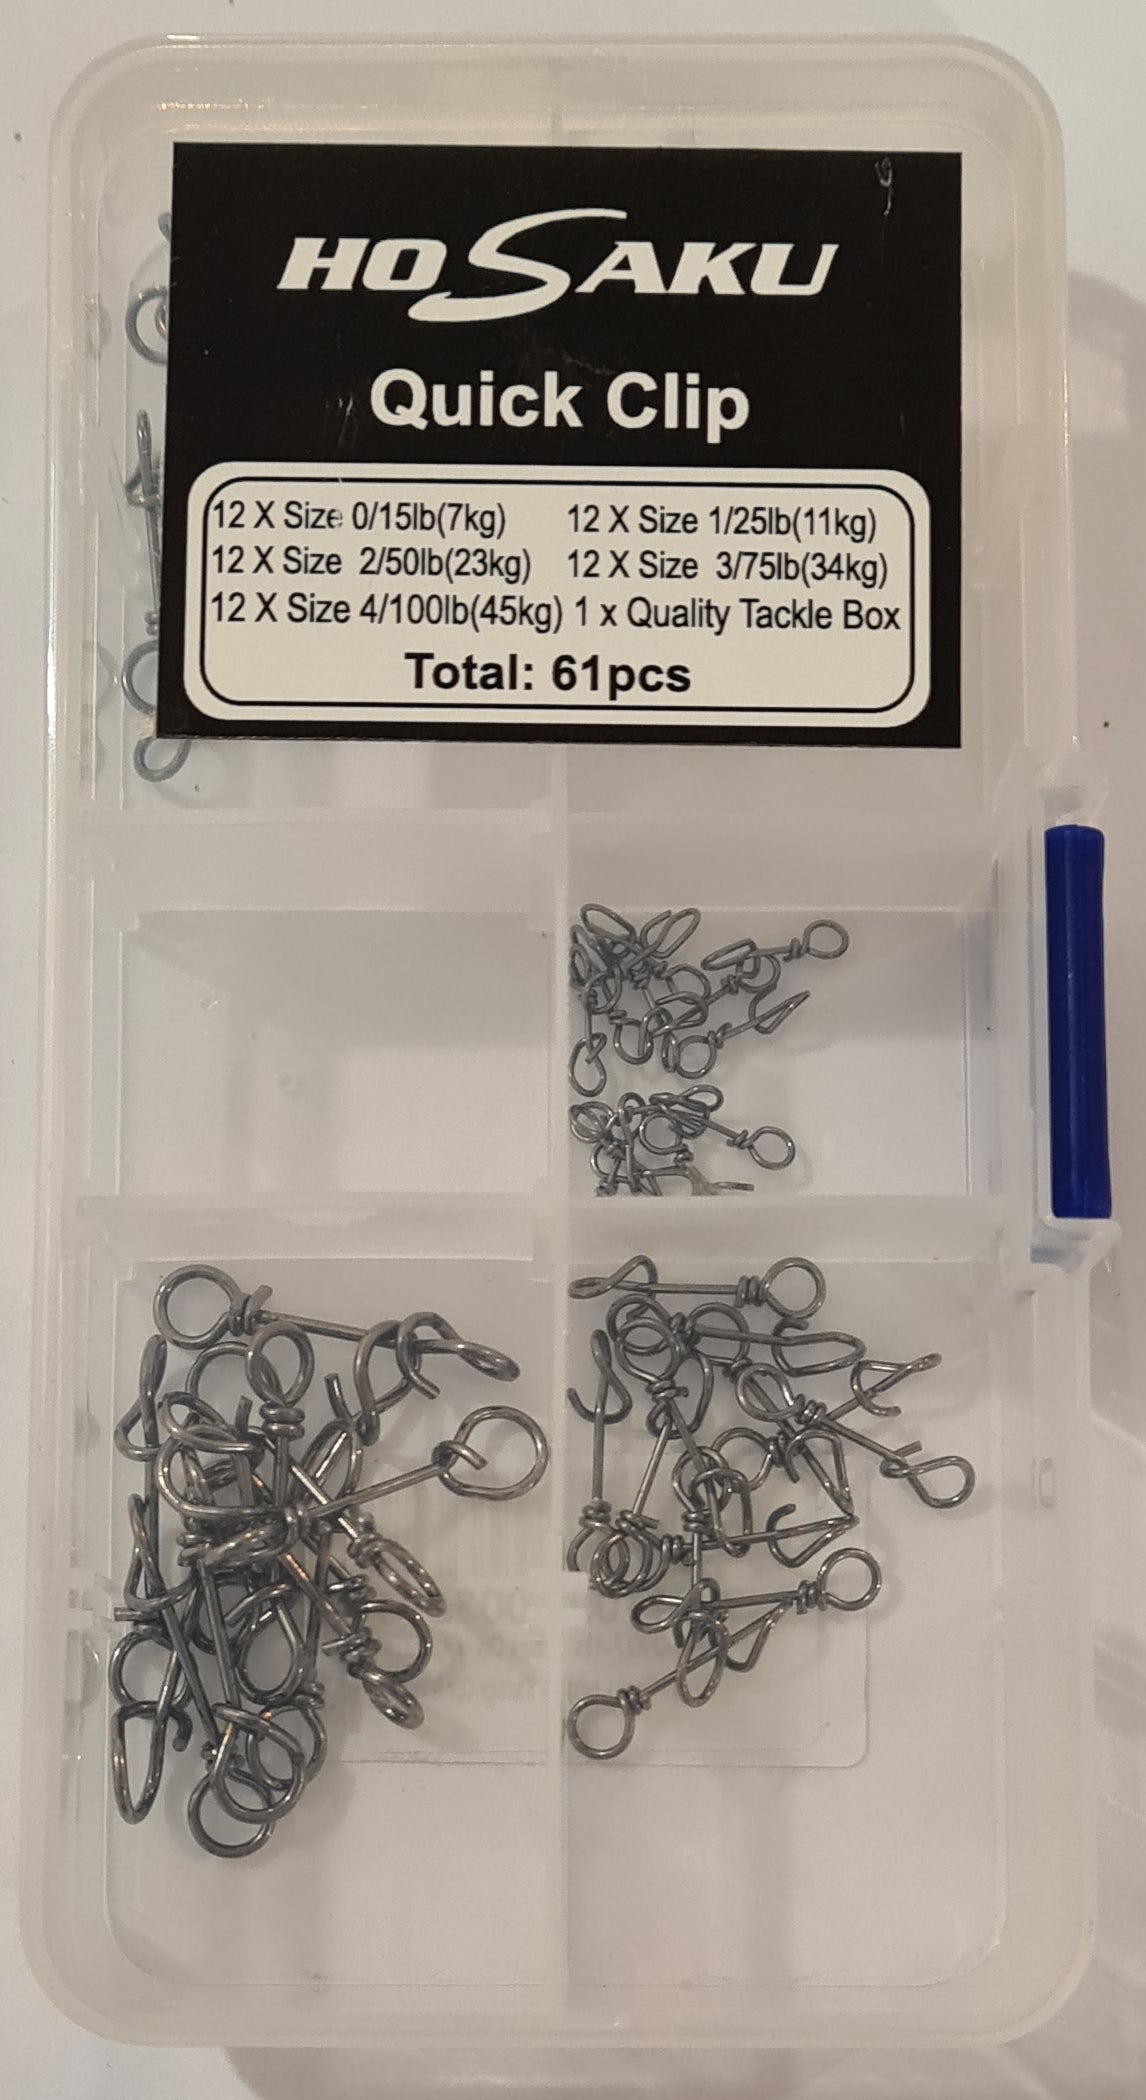  60 Pack Fishing Swivels Kit Freshwater Ball Bearing Swivels  Stainless Swivels Fishing Tackle Heavy Duty Black Nickel Terminal Tackle  Barrel Swivels Leader Lures Connector Offshore 1 2 3